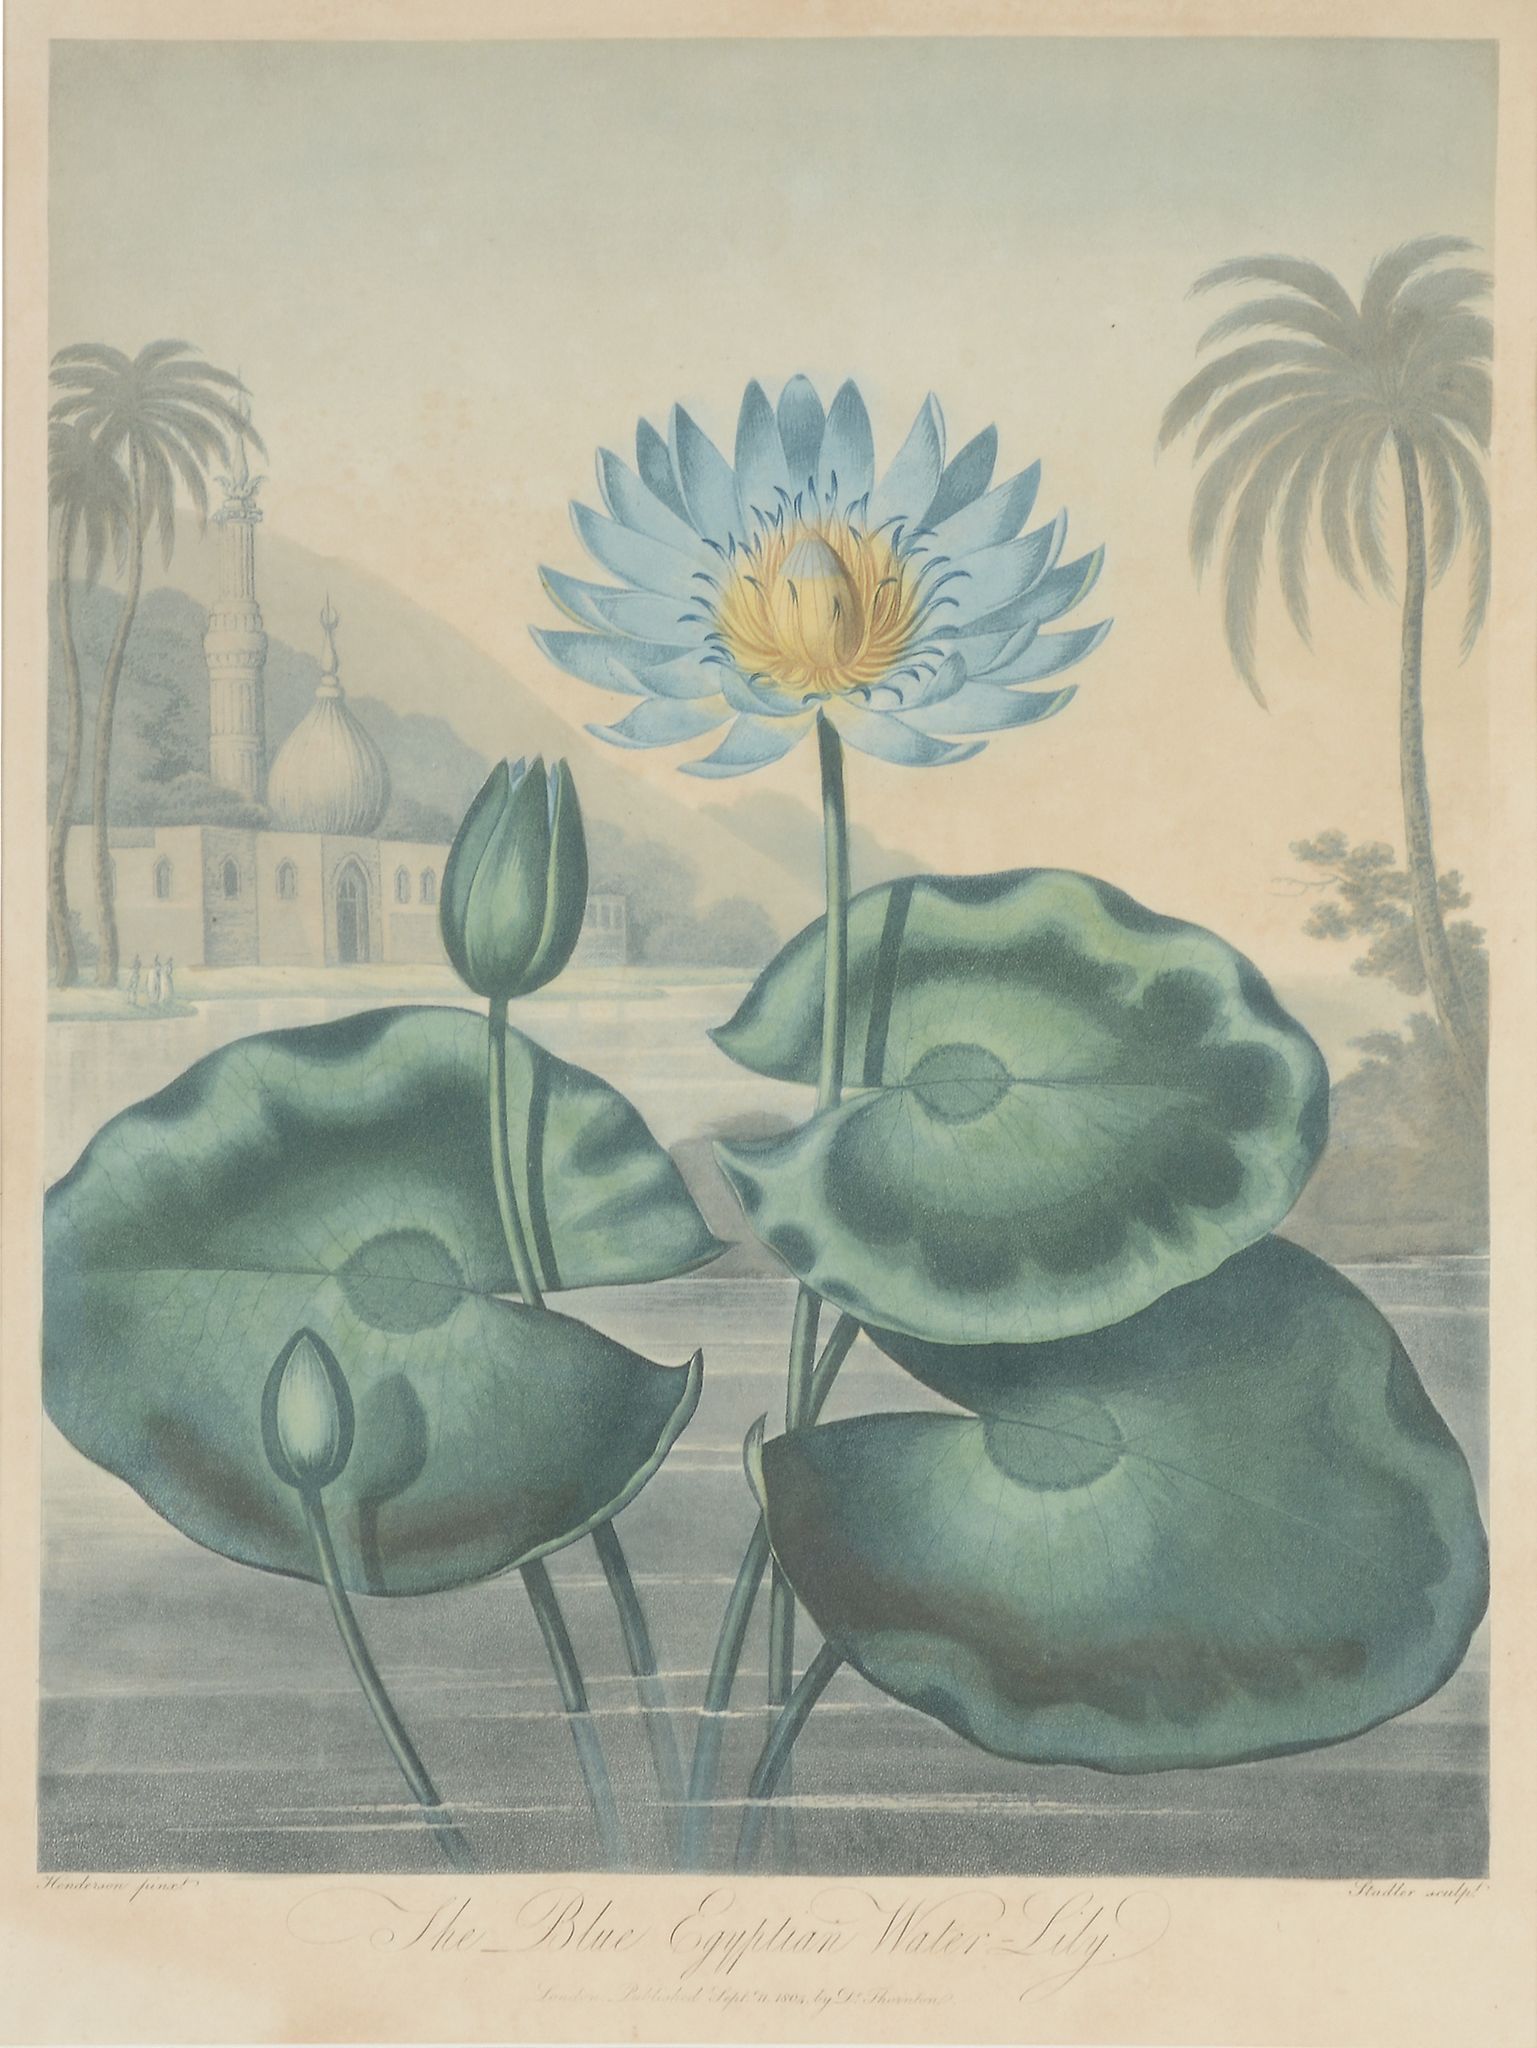 Dr Robert Thornton (Publisher) - The Quadrangular Passion Flower The Blue Egyptian Water Lily Indian - Image 3 of 4